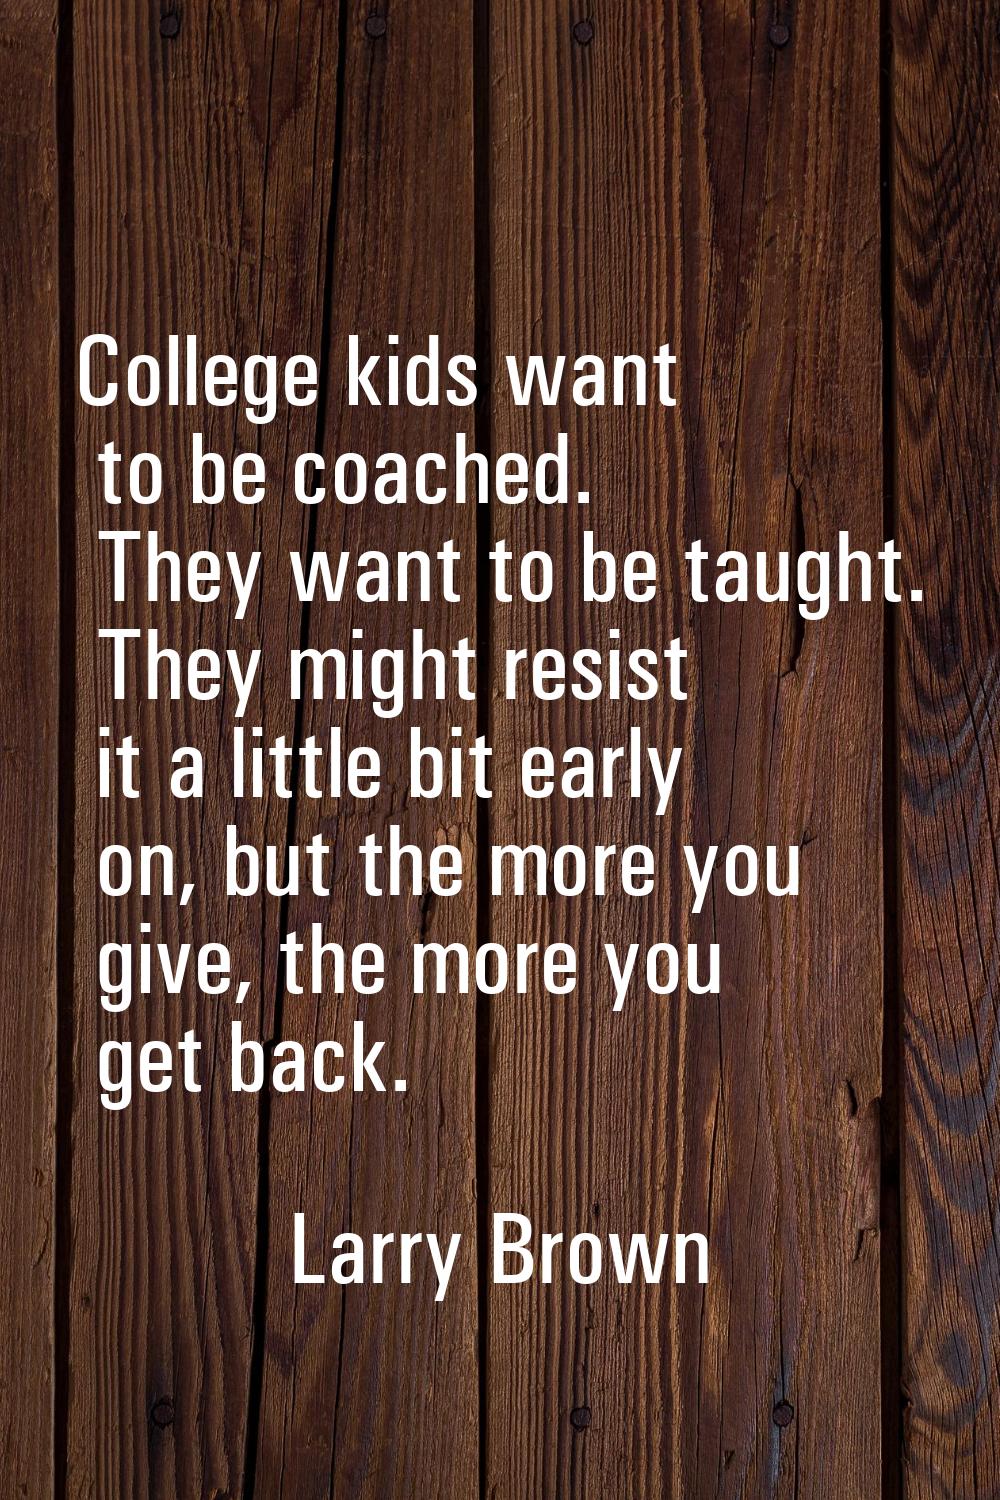 College kids want to be coached. They want to be taught. They might resist it a little bit early on